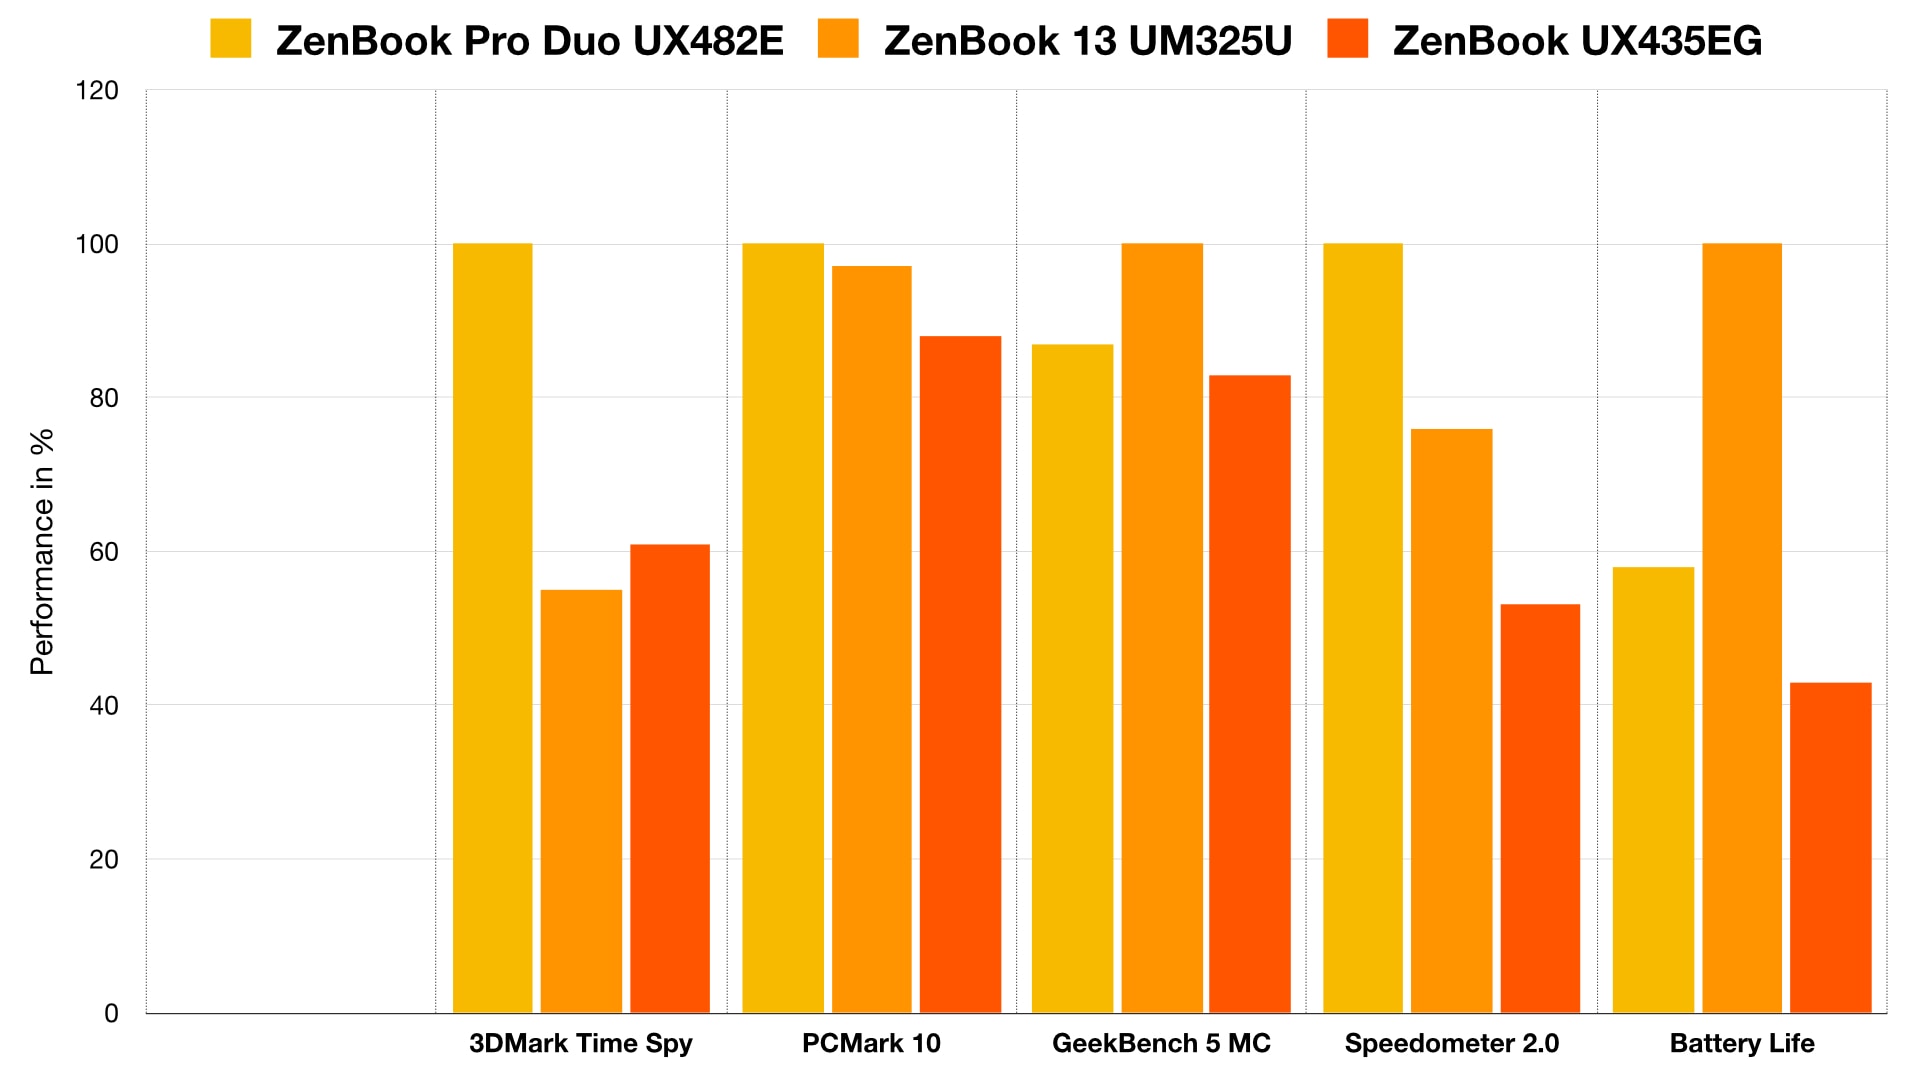 As can be seen from the chart, the Pro Duo outperforms similarly specced machines. This is most likely a result of better cooling afforded by the larger air vent under the second screen. On the other hand, battery life takes a beating owing to that secondary display.